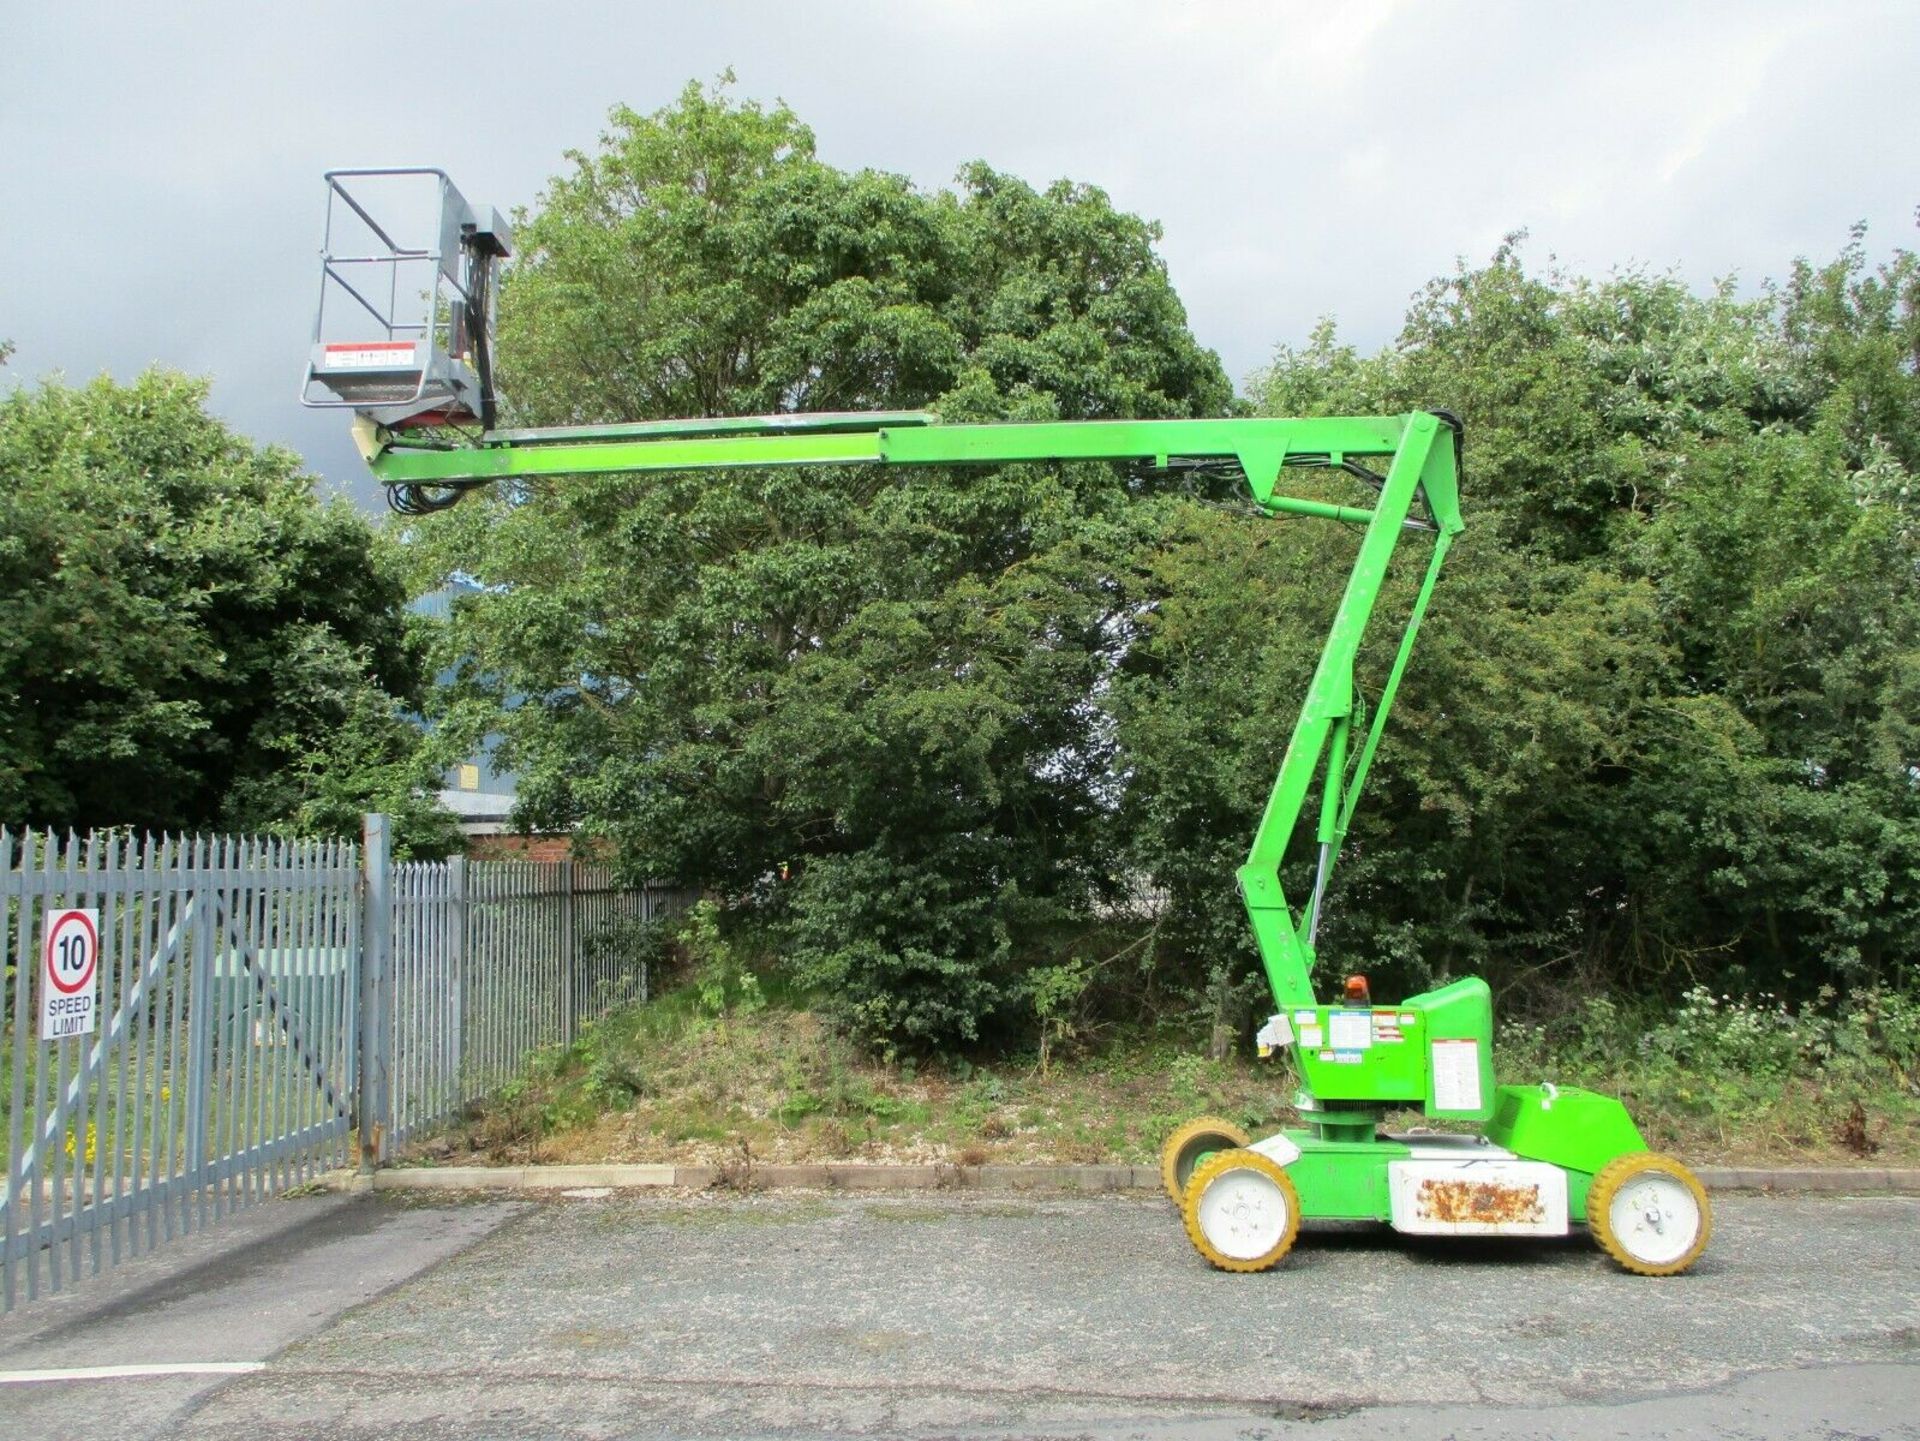 Nifty Lift HR12 Self Propelled Access Platform 2007 - Image 9 of 12